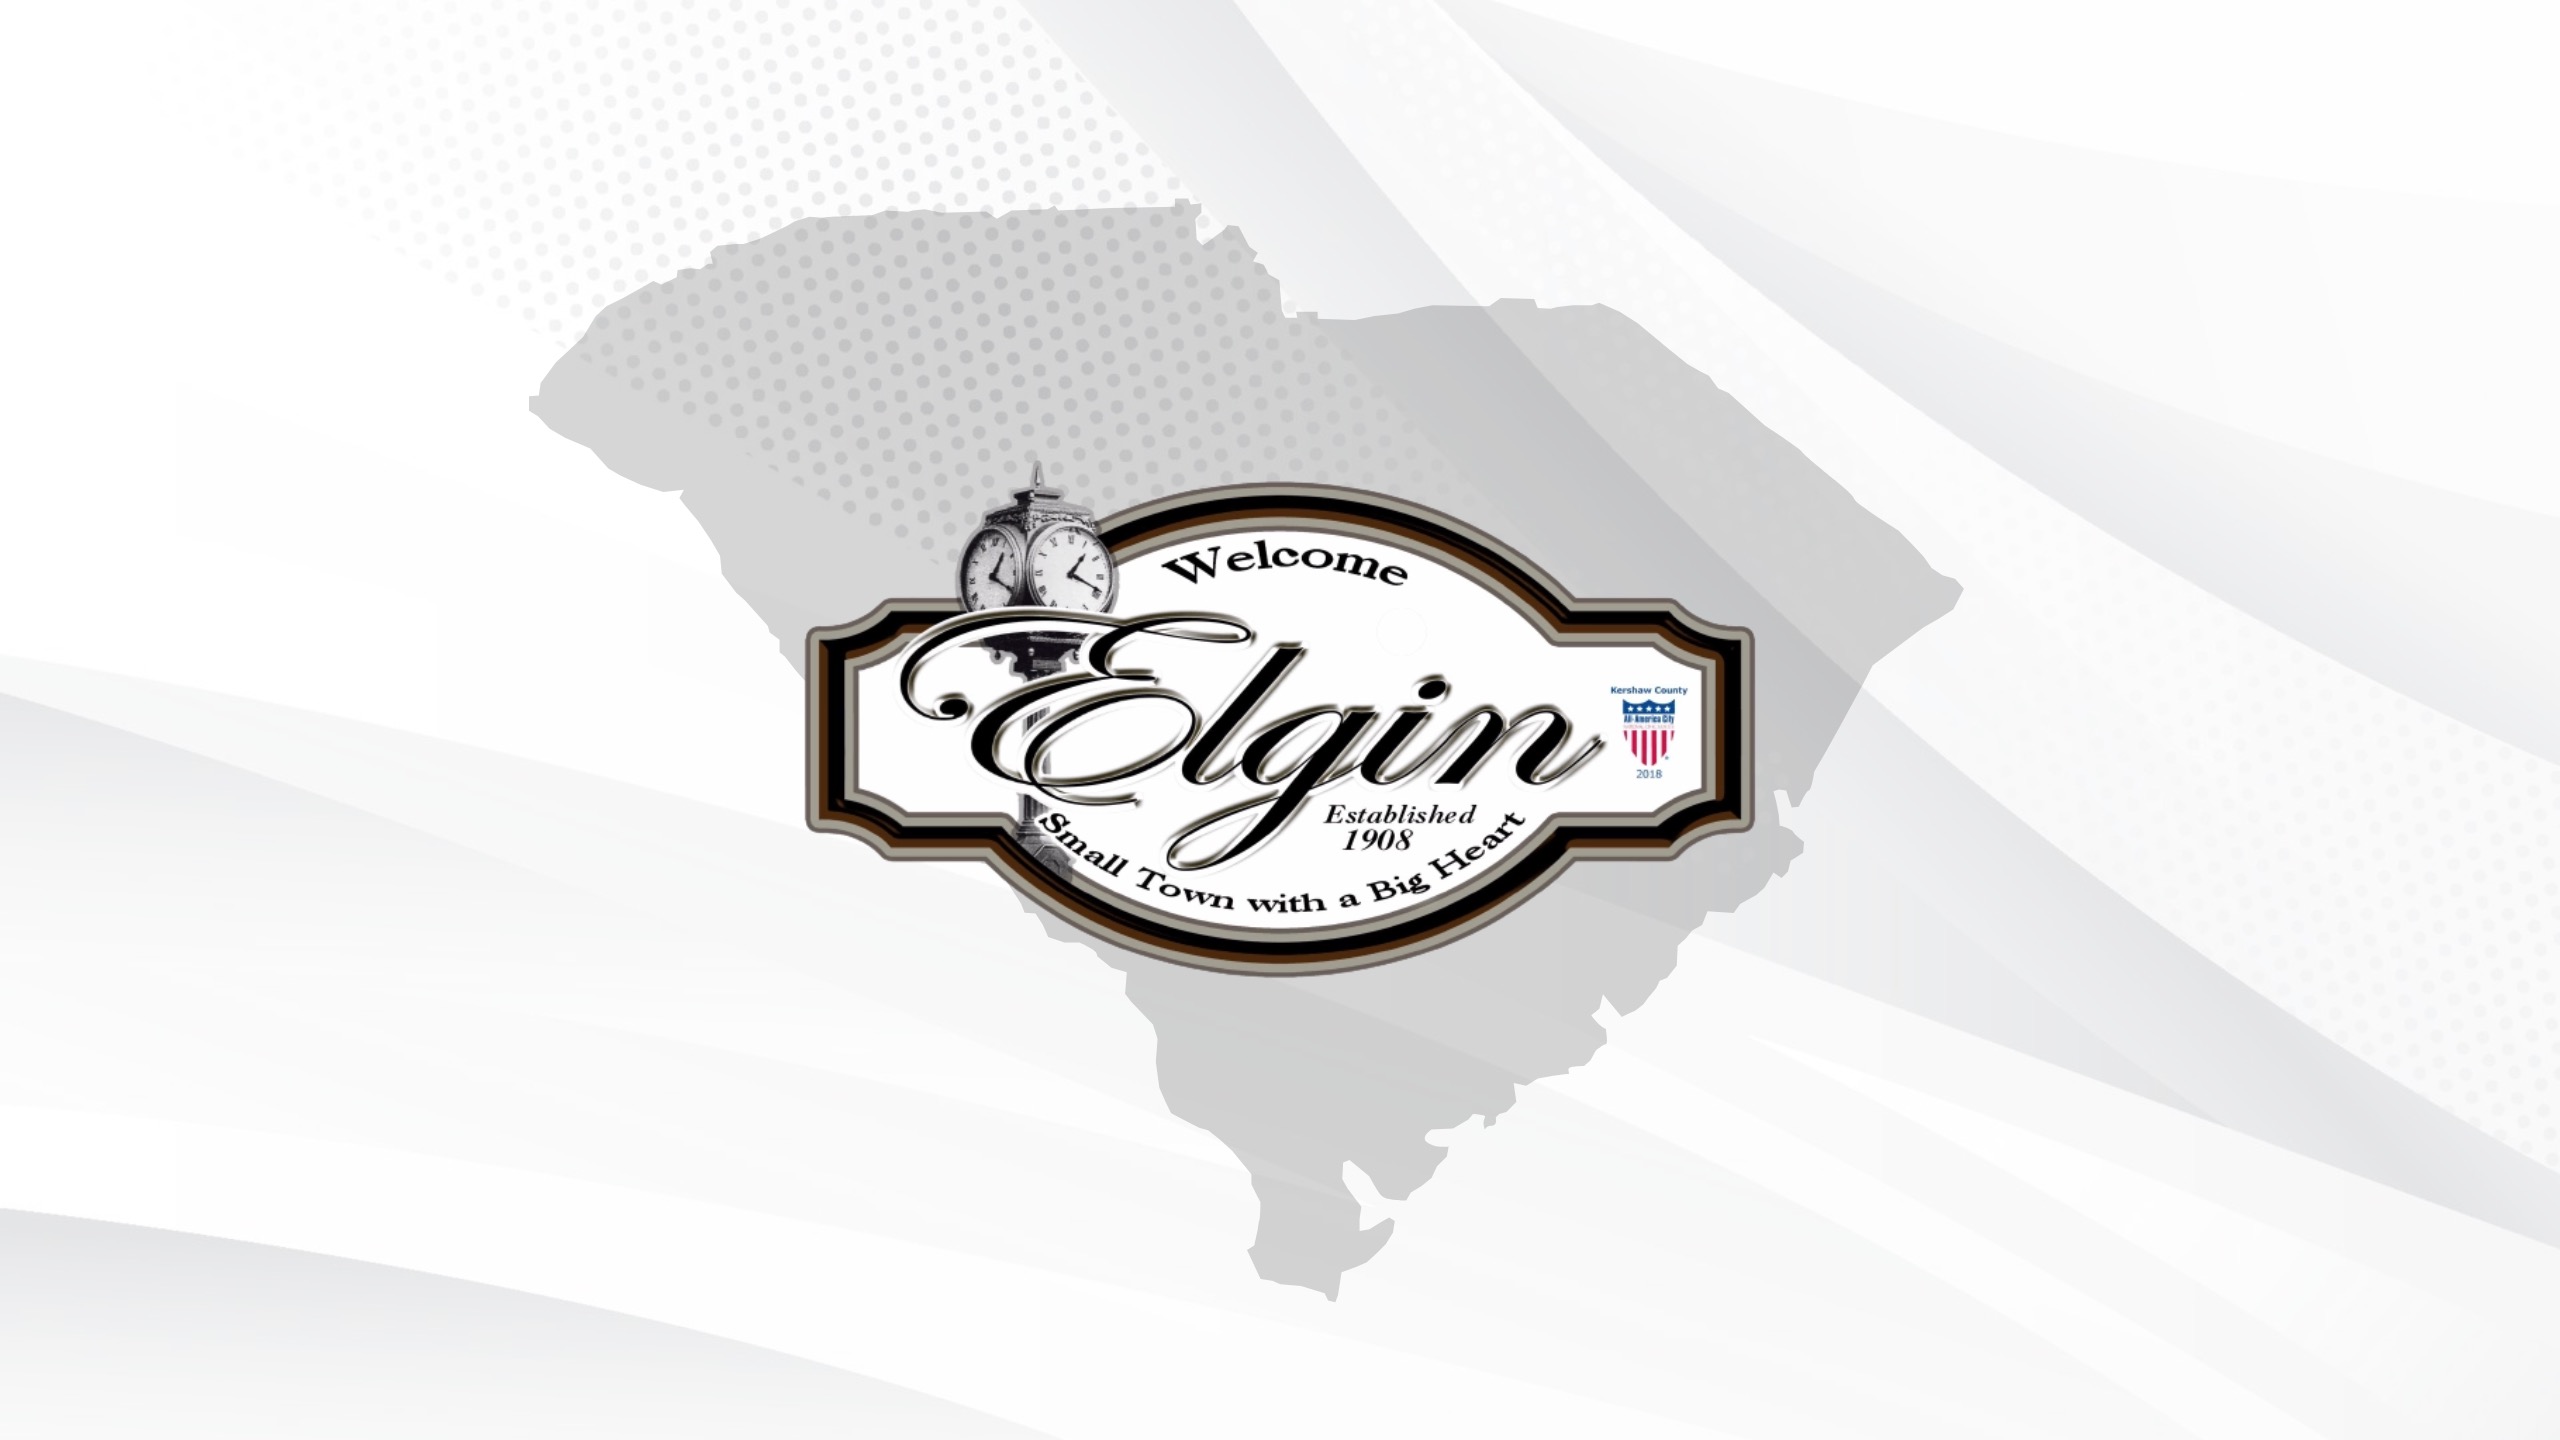 Elgin, SC logo over graphic of state map